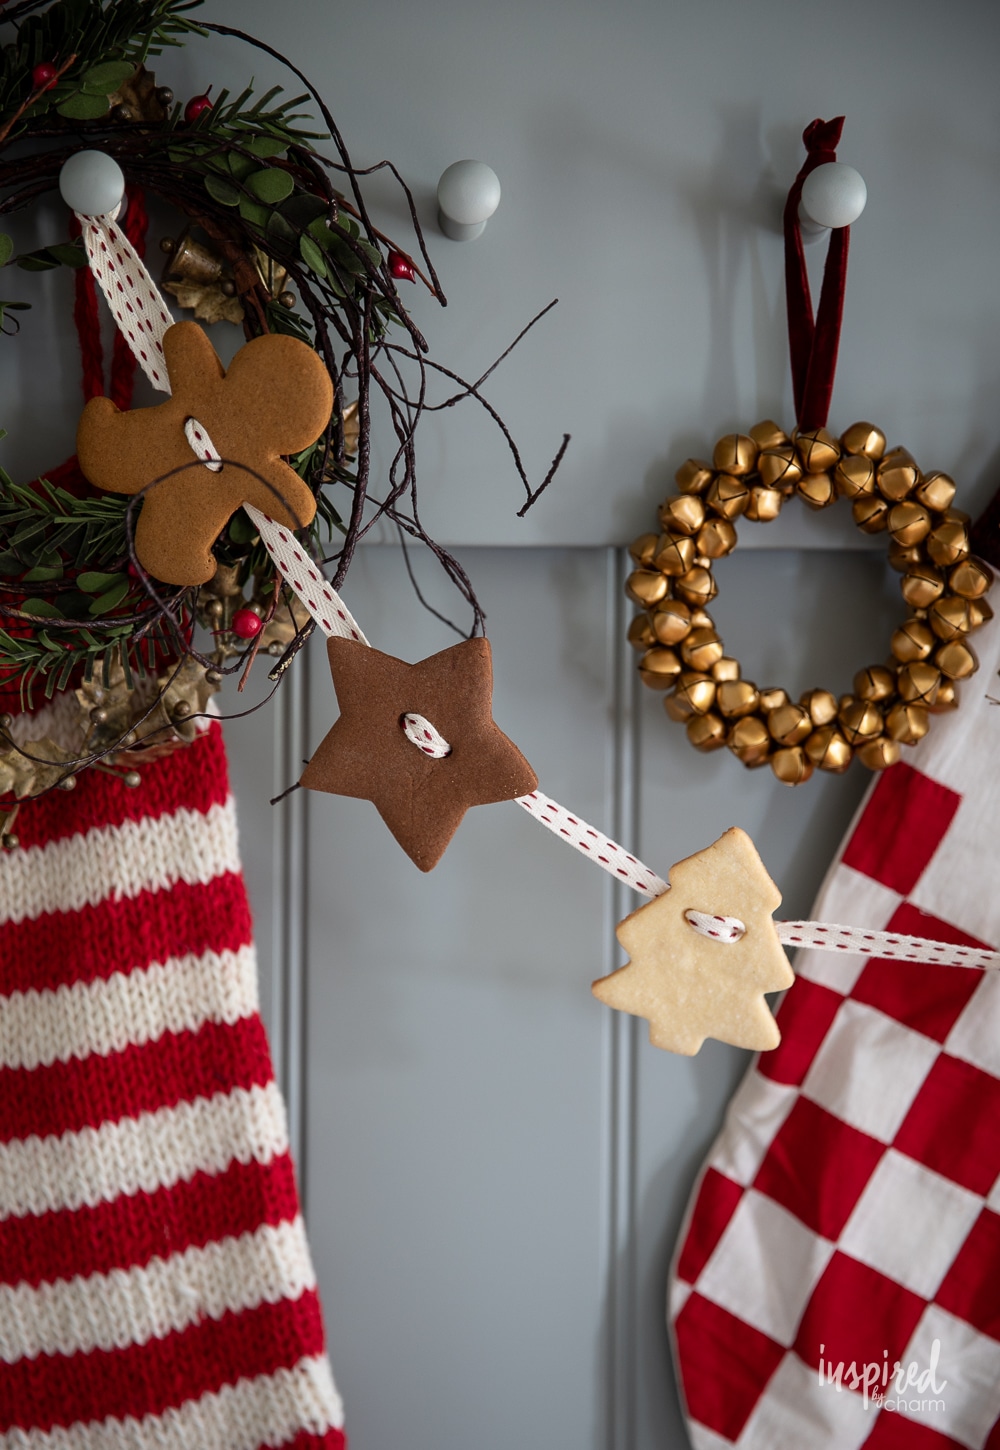 gingerbread cookie garland hung on pegs with festive decor.